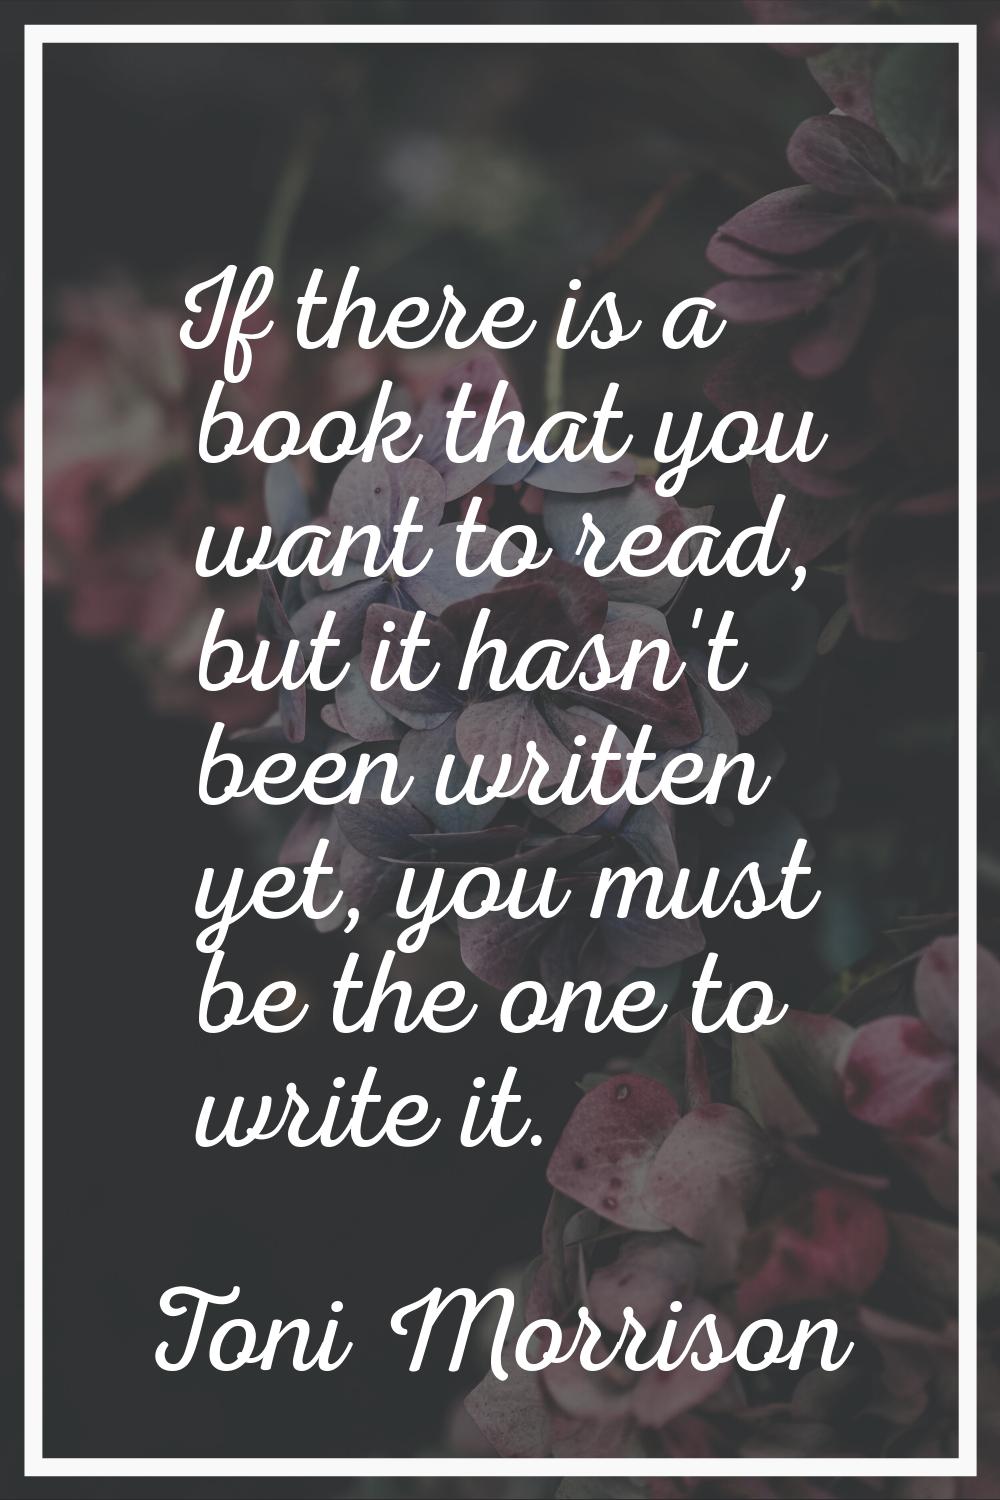 If there is a book that you want to read, but it hasn't been written yet, you must be the one to wr